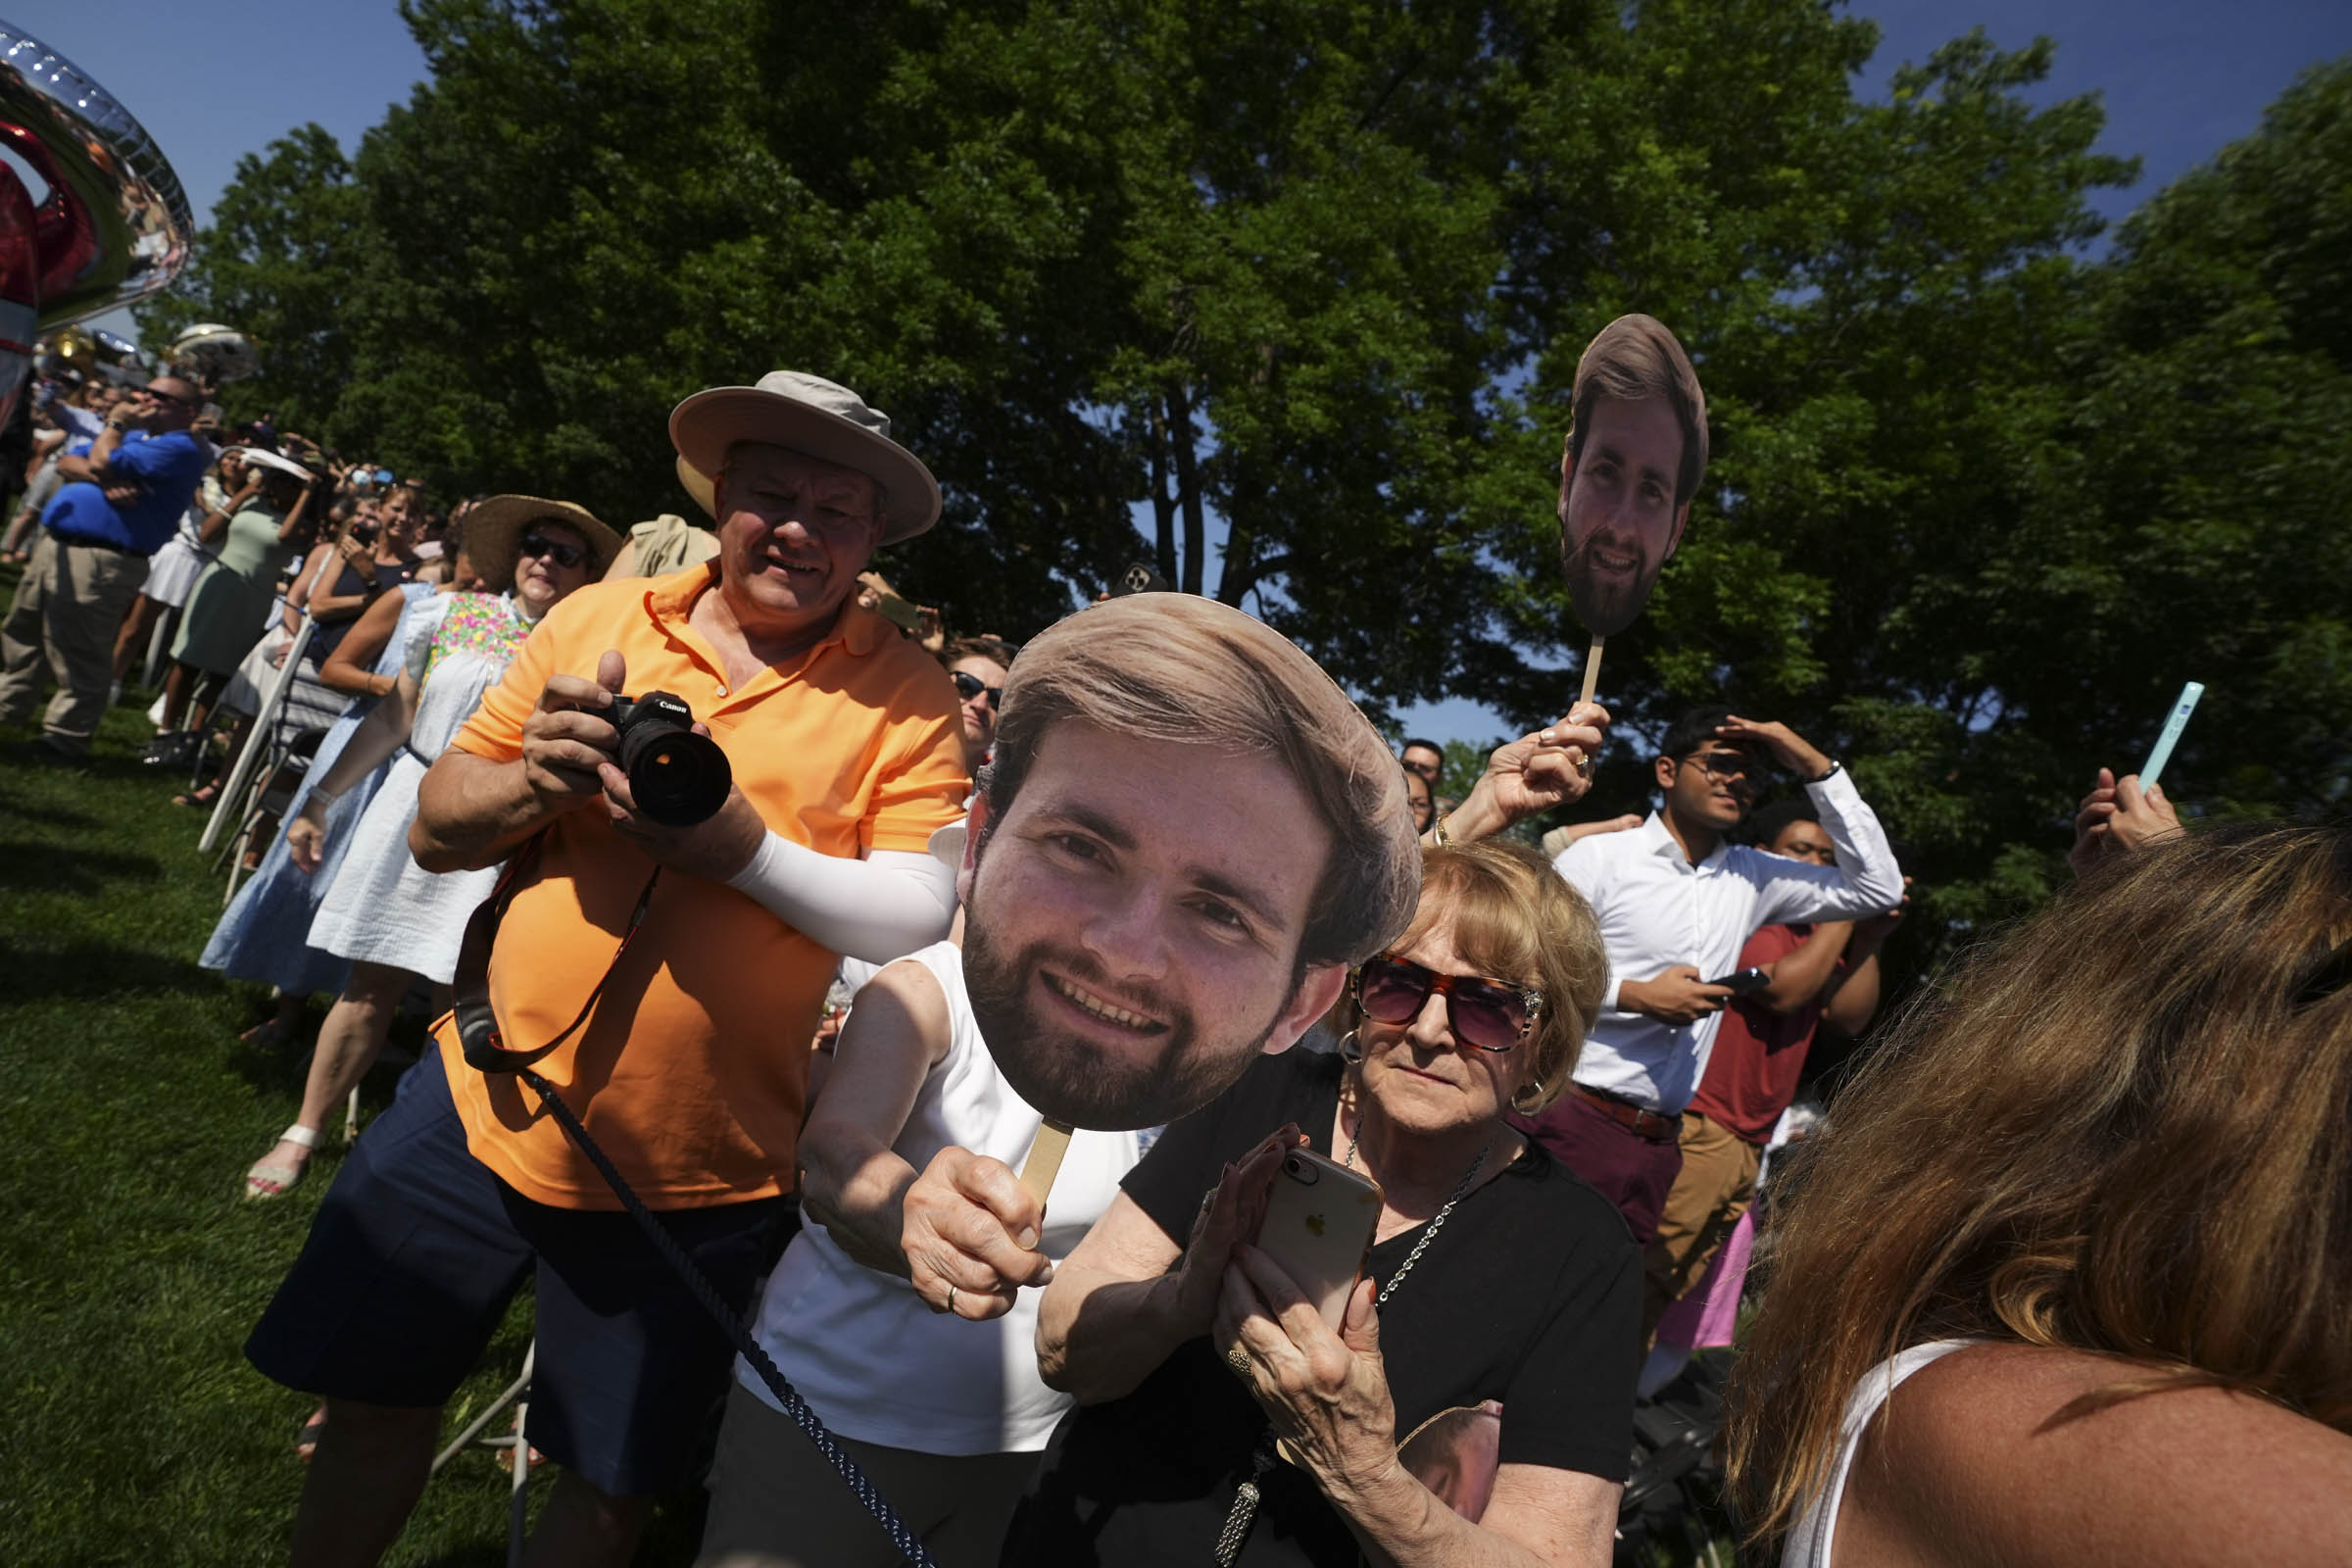 A student’s family members hold large cardboard cutouts of their graduate’s face.